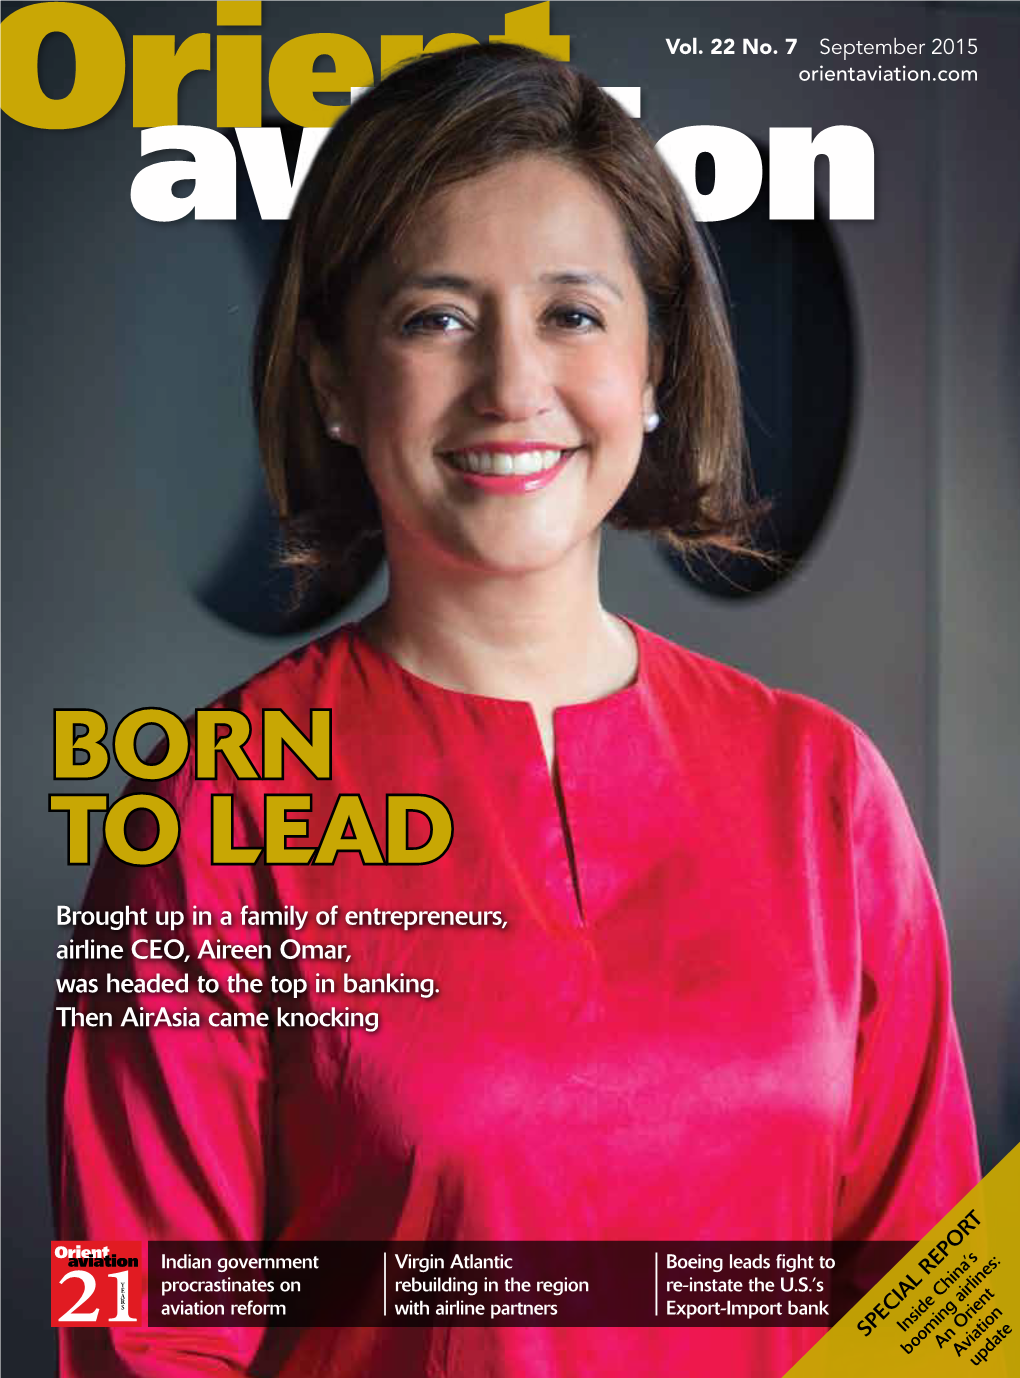 BORN to LEAD Brought up in a Family of Entrepreneurs, Airline CEO, Aireen Omar, Was Headed to the Top in Banking